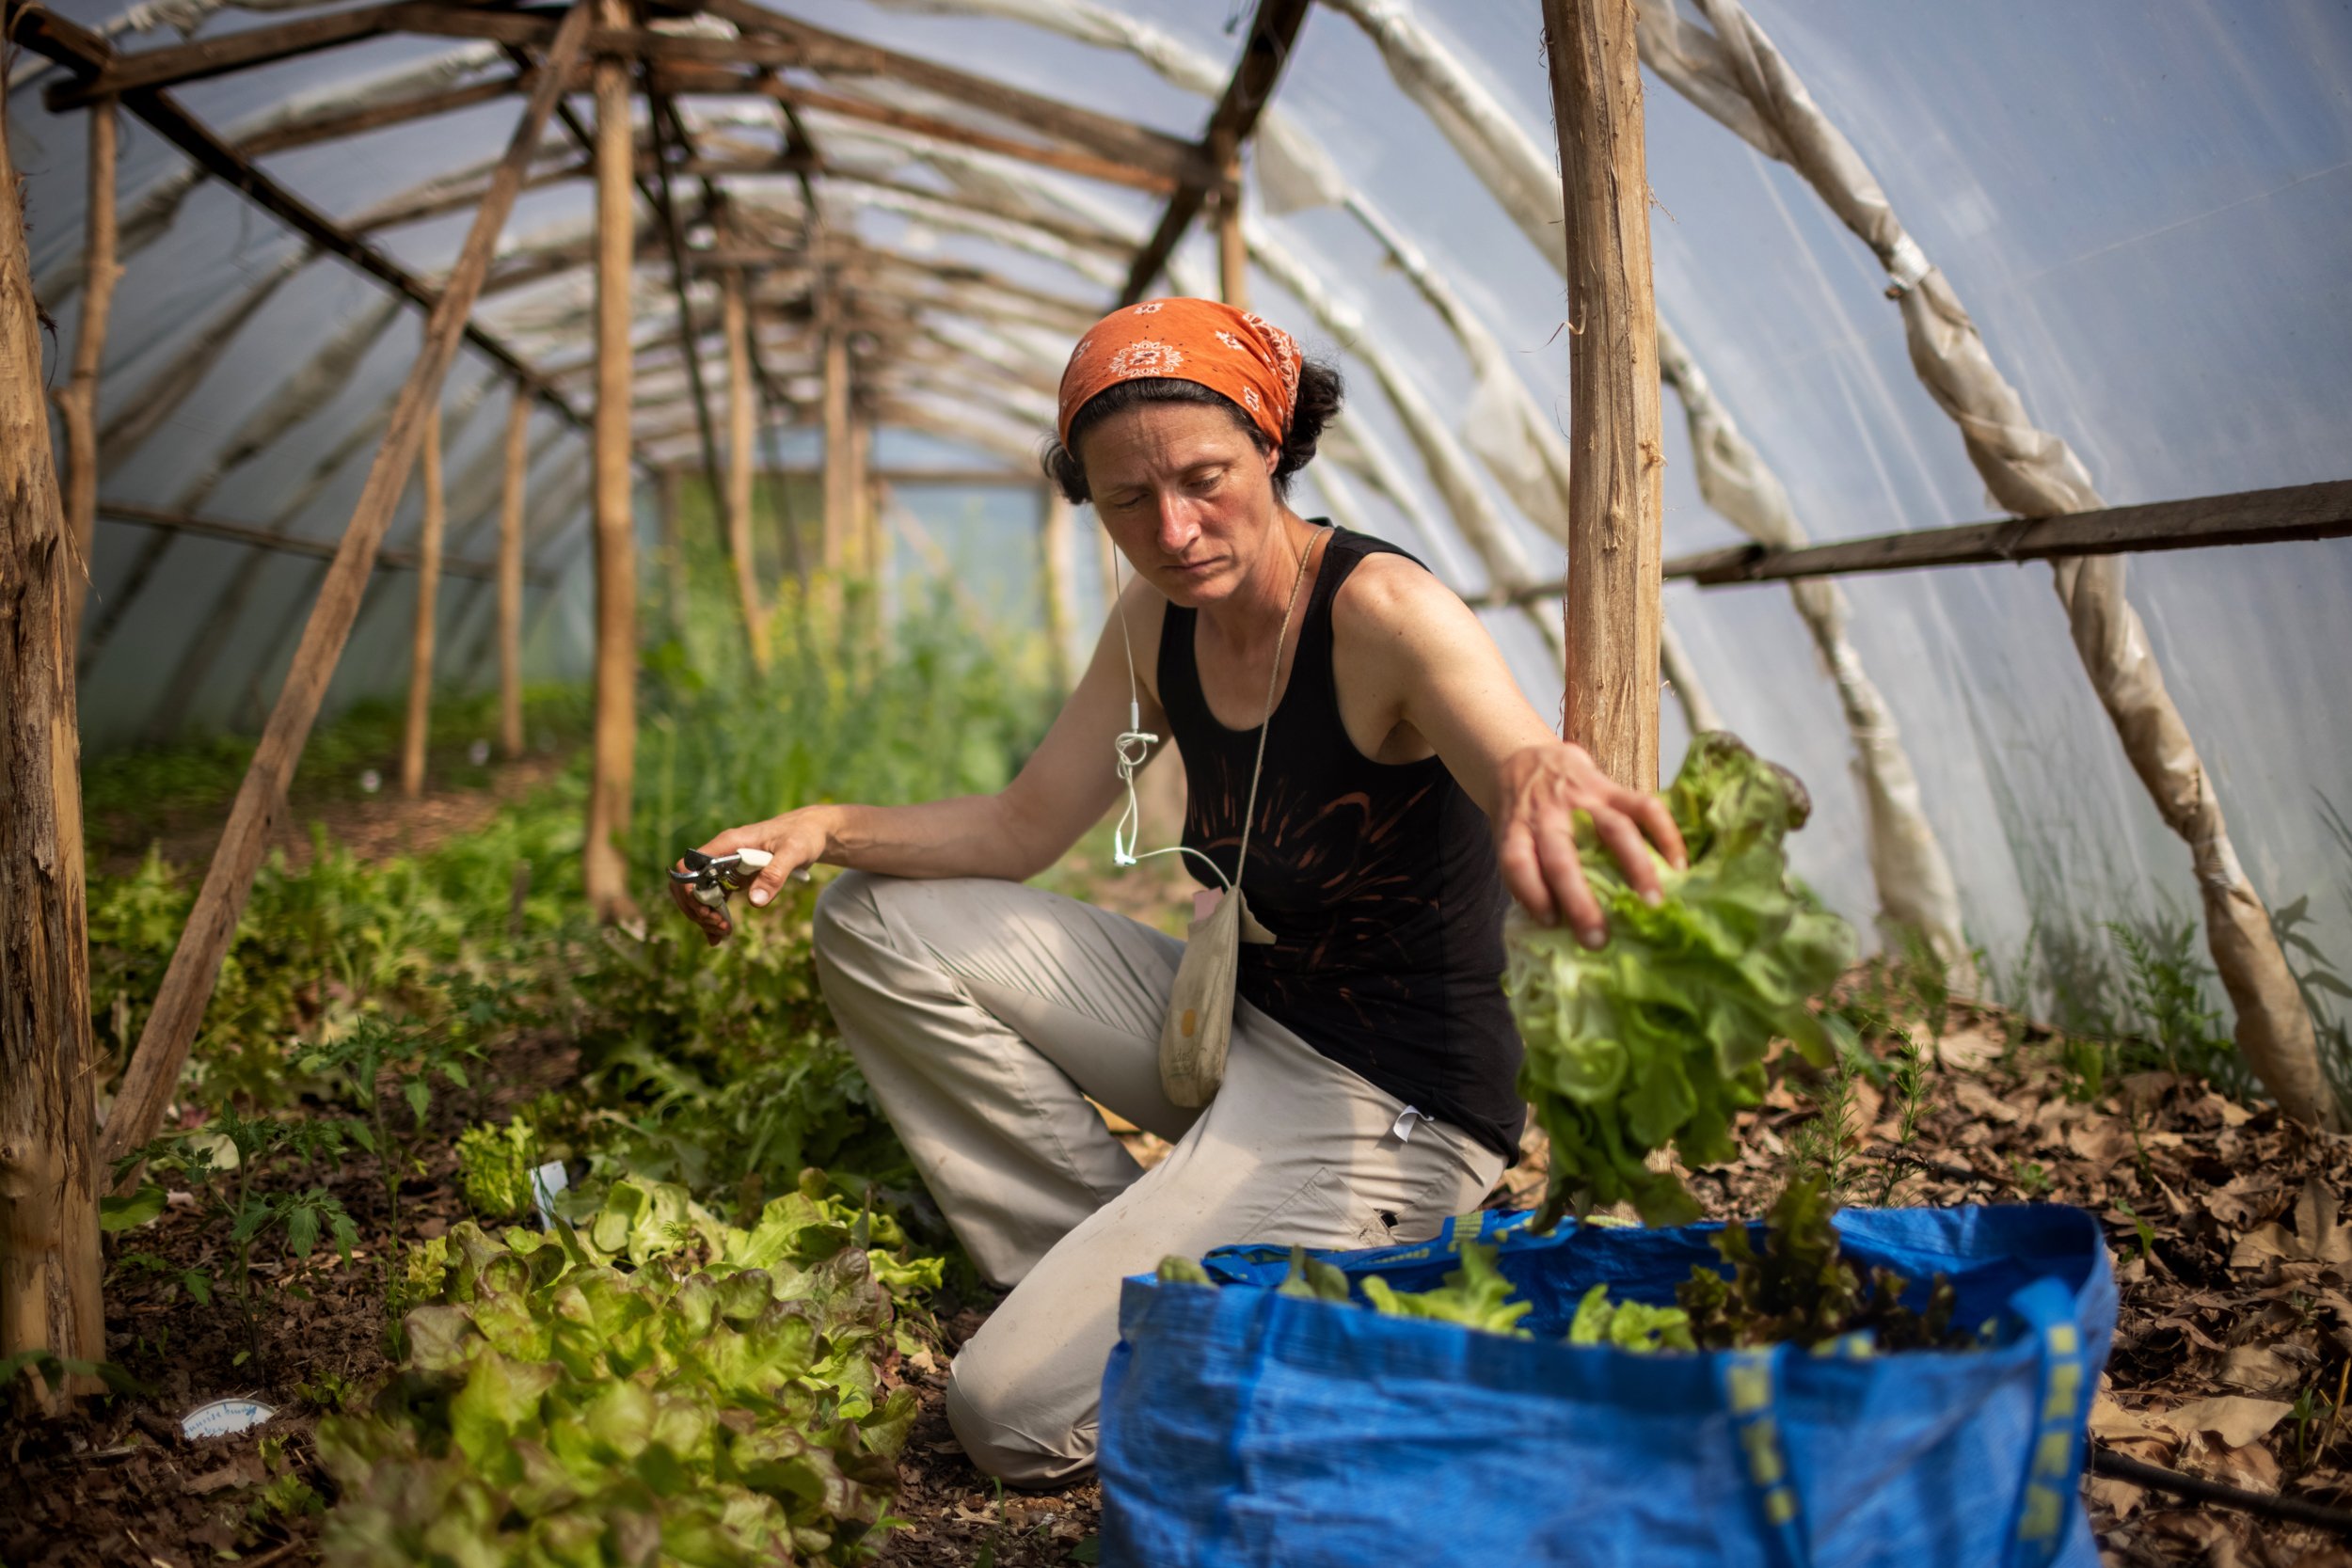  Etelka picking lettuce in her greenhouse tent in Nagyszékely on May 11, 2022. In her daily work, she puts her botanical knowledge from the University of Horticulture to good use. She is a recognized expert in permaculture, and she is often called up